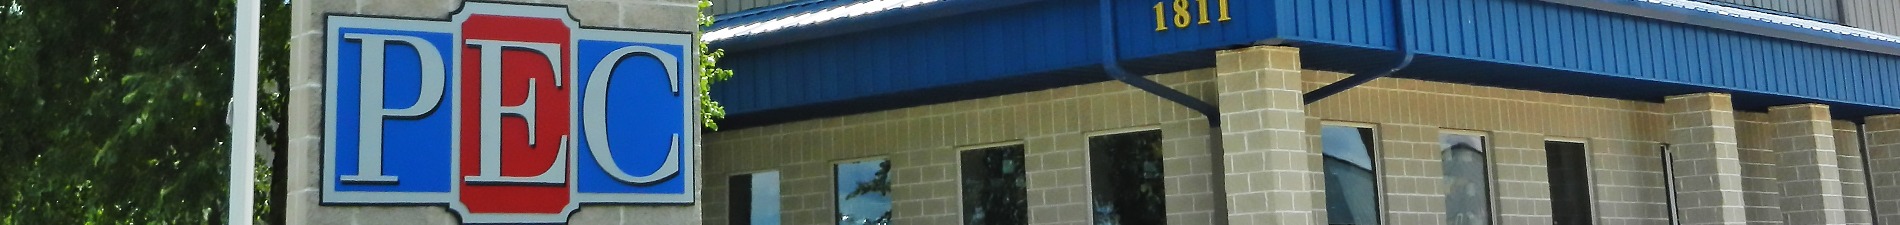 Header image of PEC storefront sign with building in background